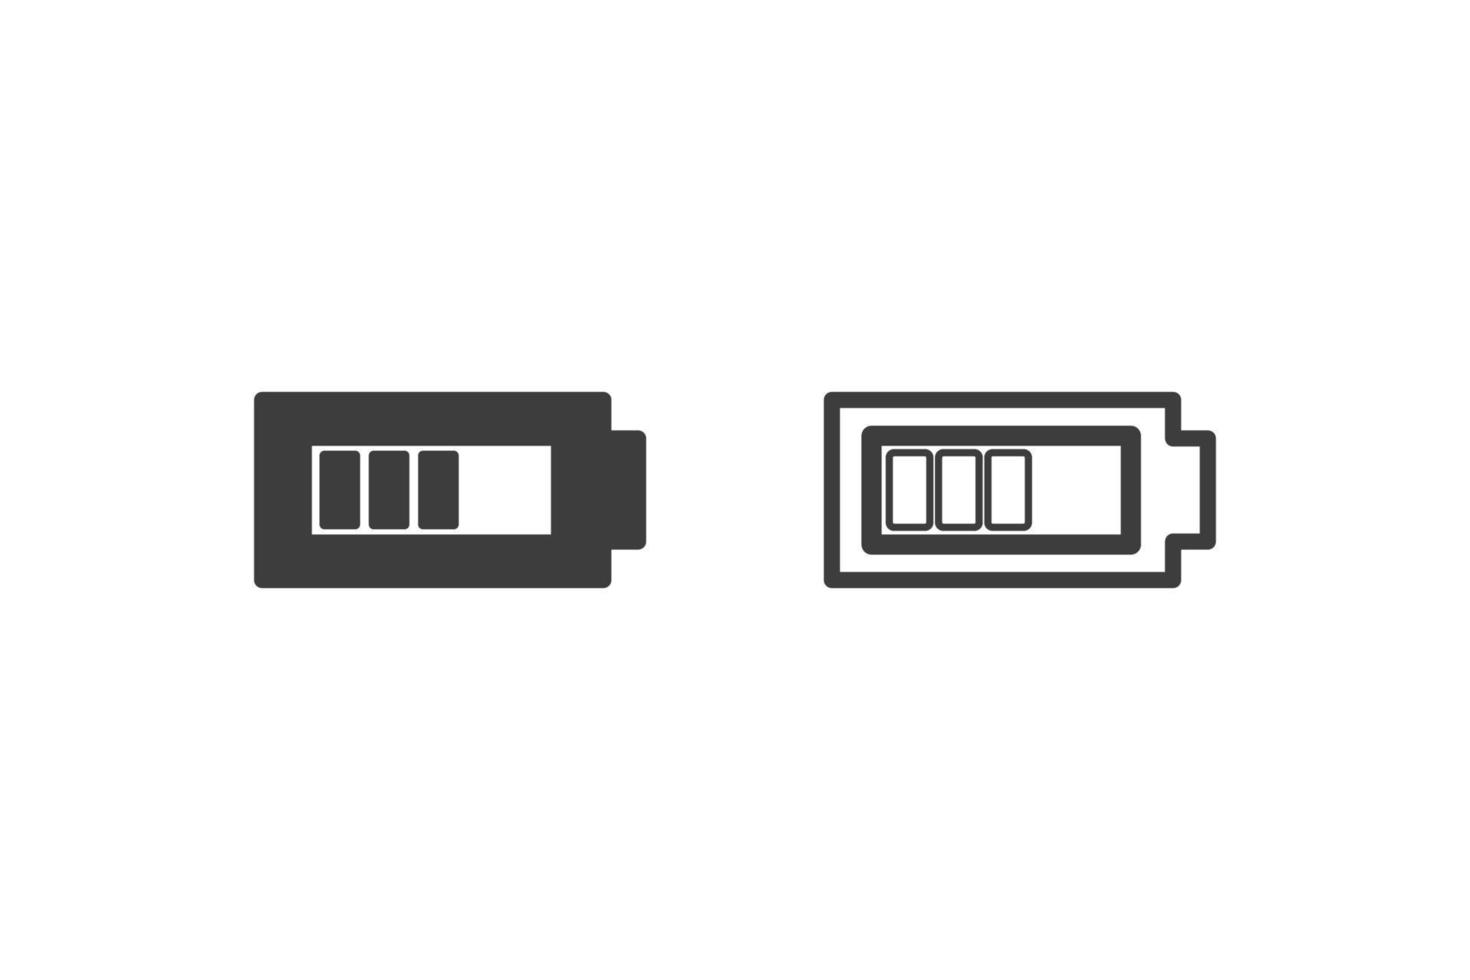 Battery icon vector illustration glyph style design with 2 style icons black and white. Isolated on white background.